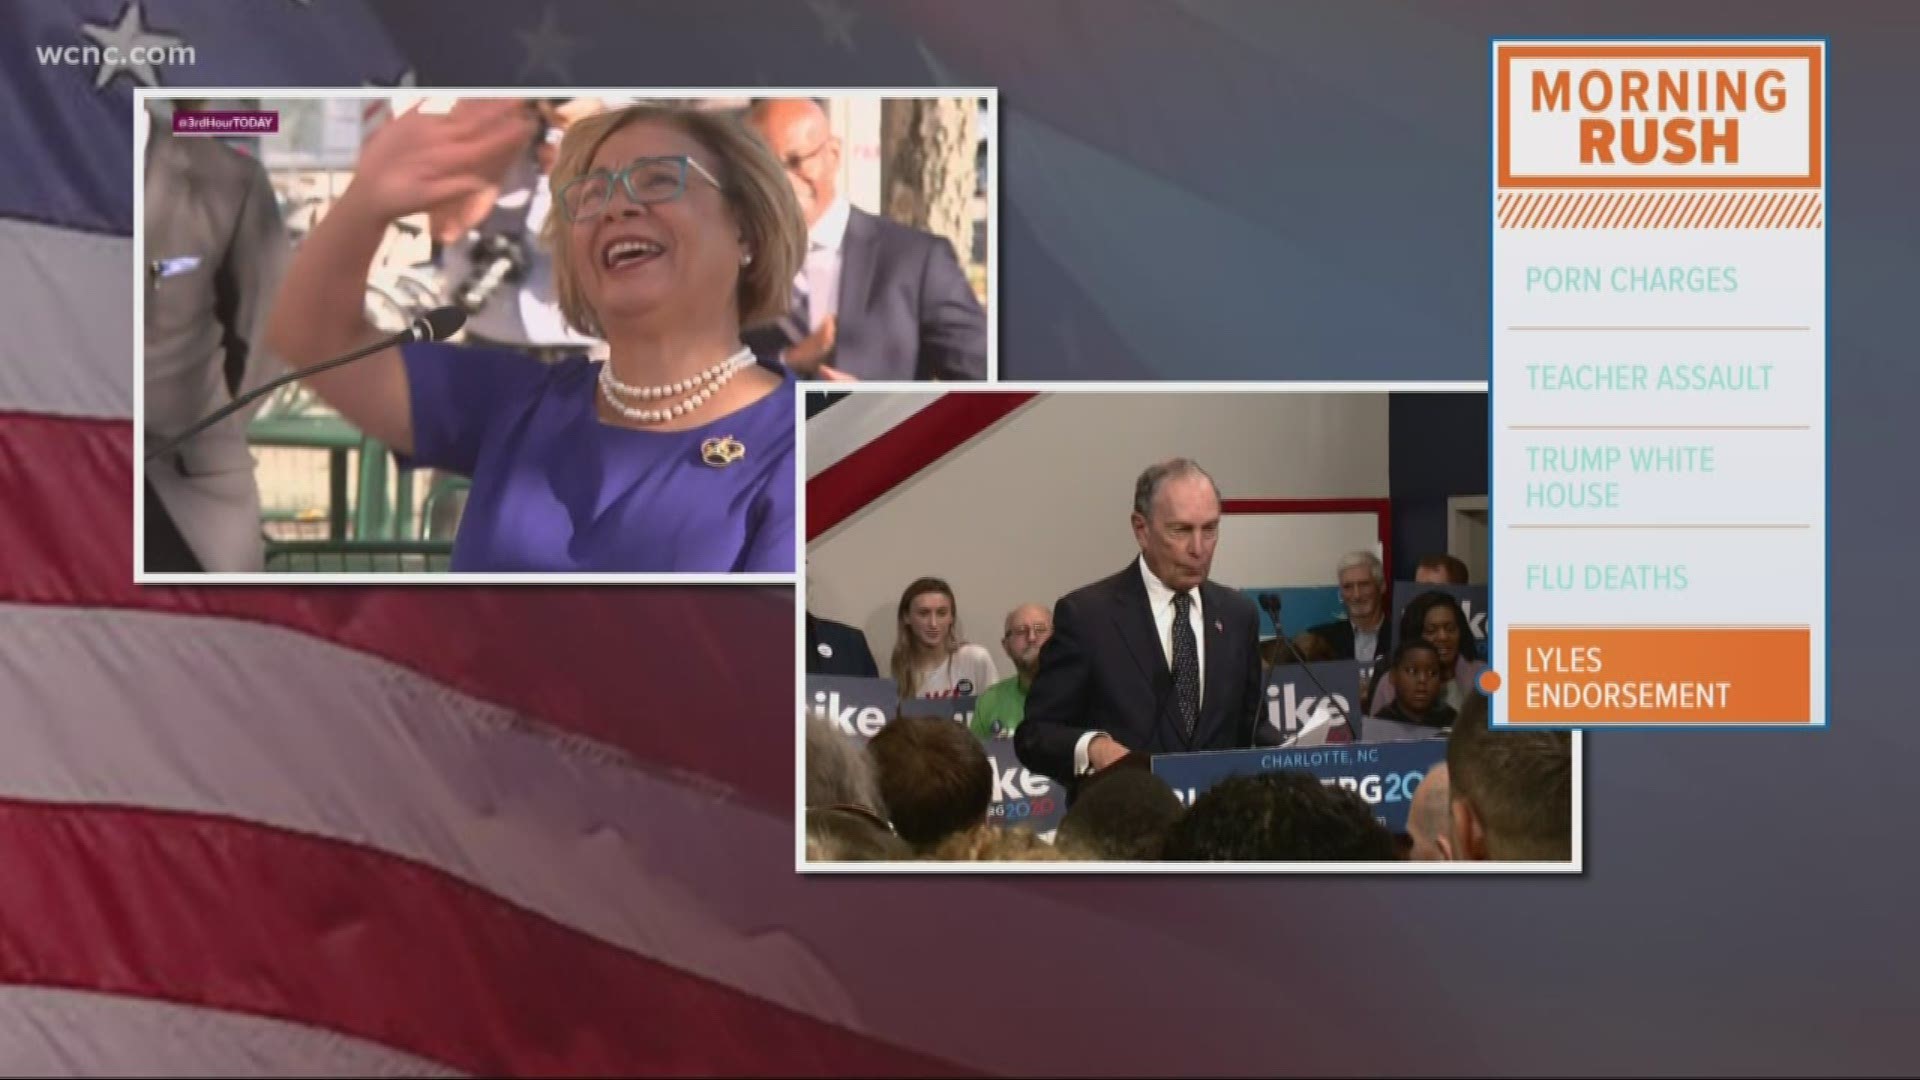 Charlotte Mayor Vi Lyles announced Thursday that she is endorsing Democratic presidential candidate Michael Bloomberg in his bid for the White House.